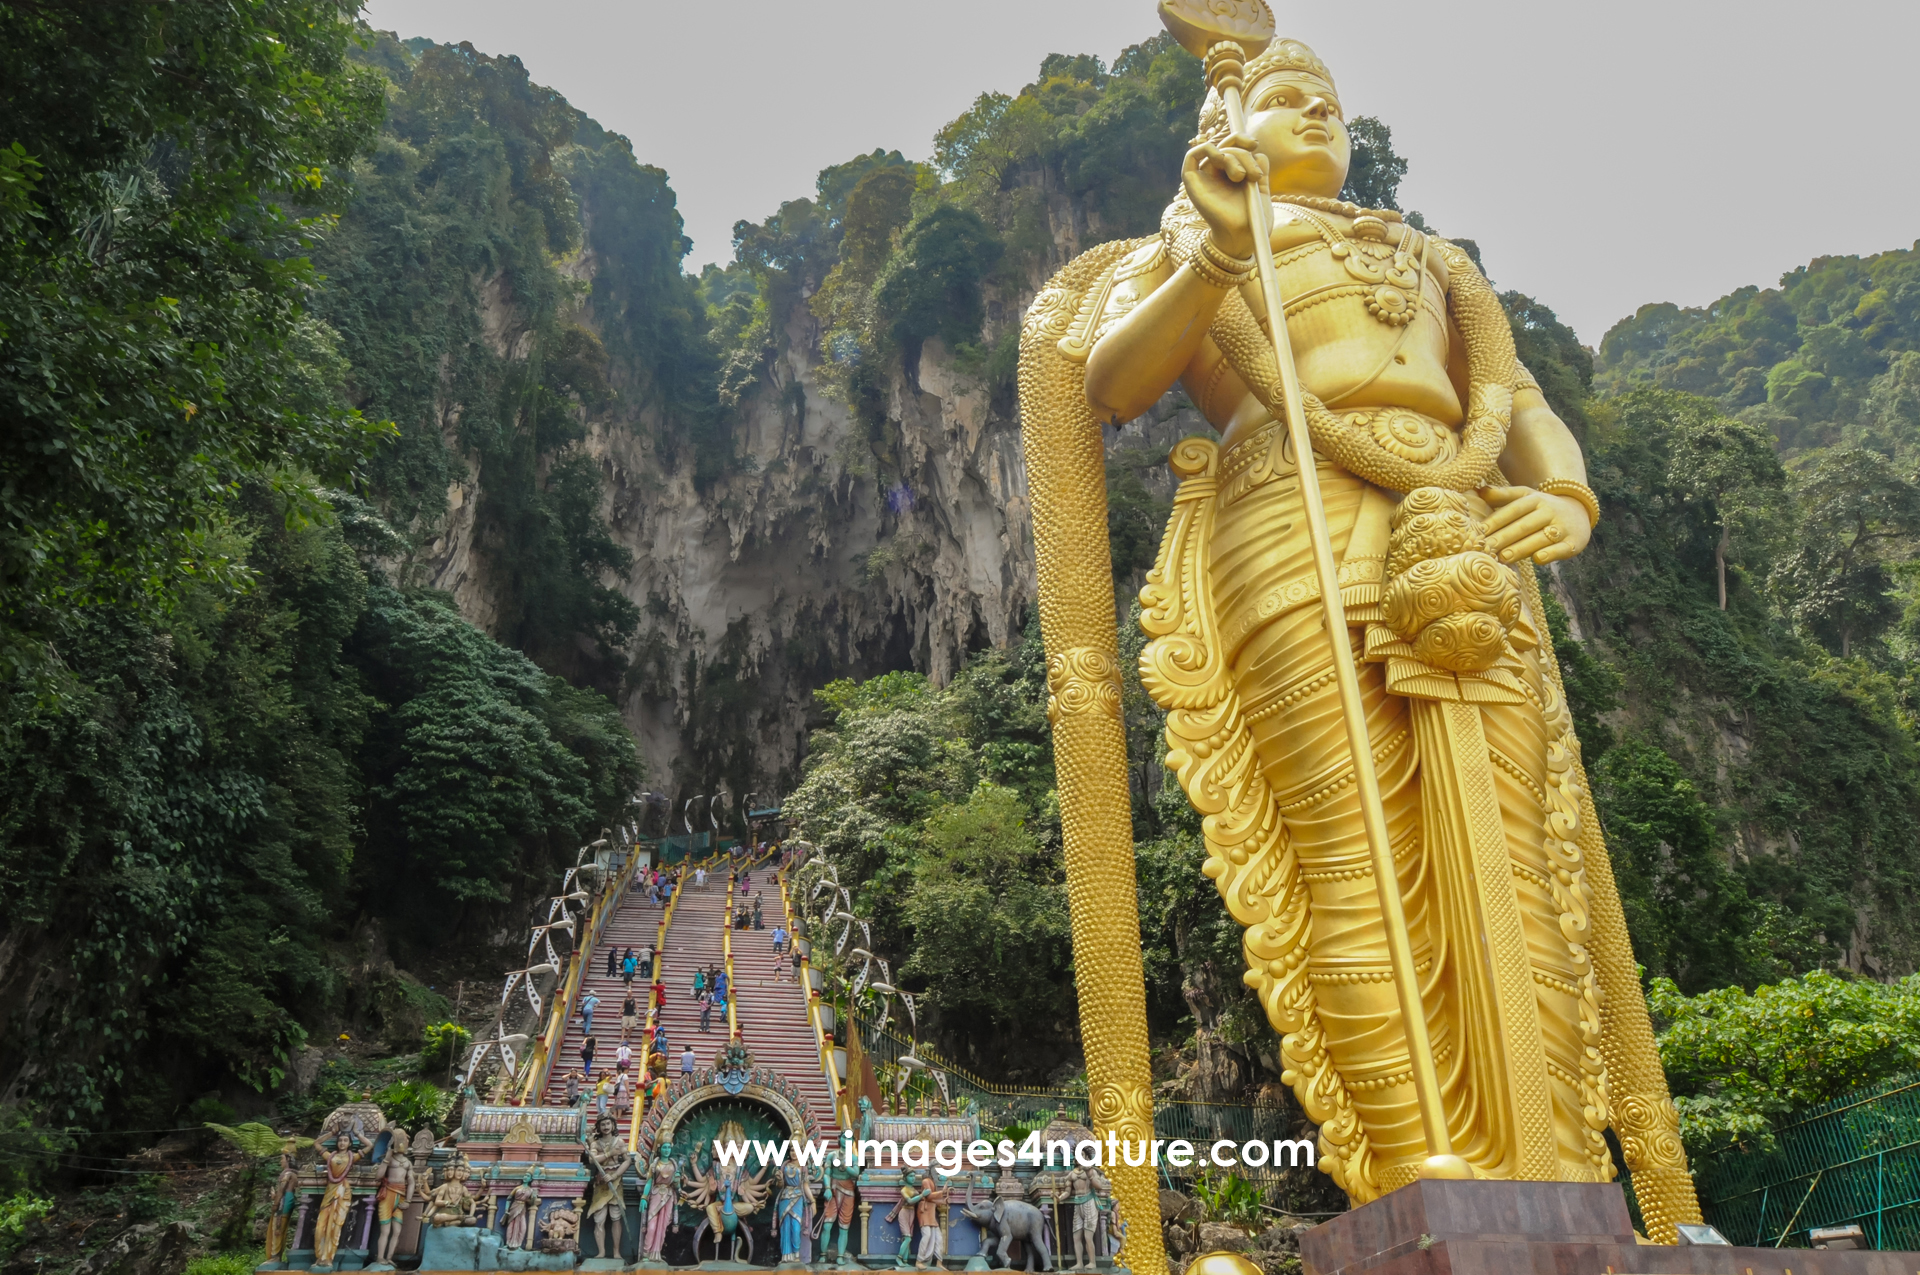 Huge golden statue in front of stairs leading into mountain cave